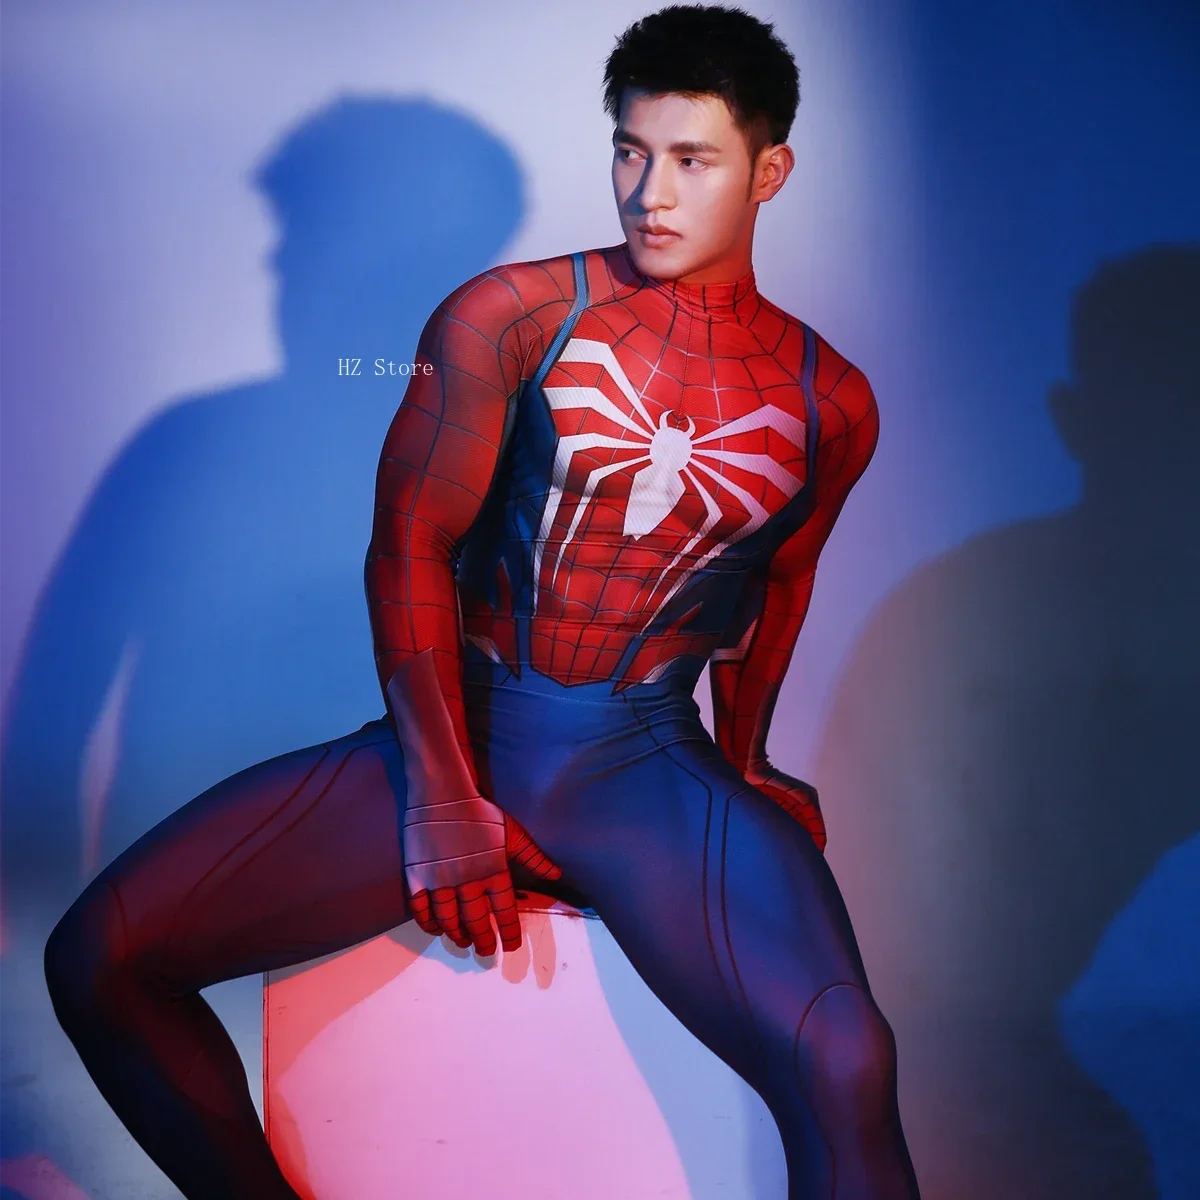 

Marvel Spider-Man PS52 Peter Parker Bodysuit with Detachable Mask Sexy Cos Costume Clothing for Men's Man Birthday Gift J21030BA